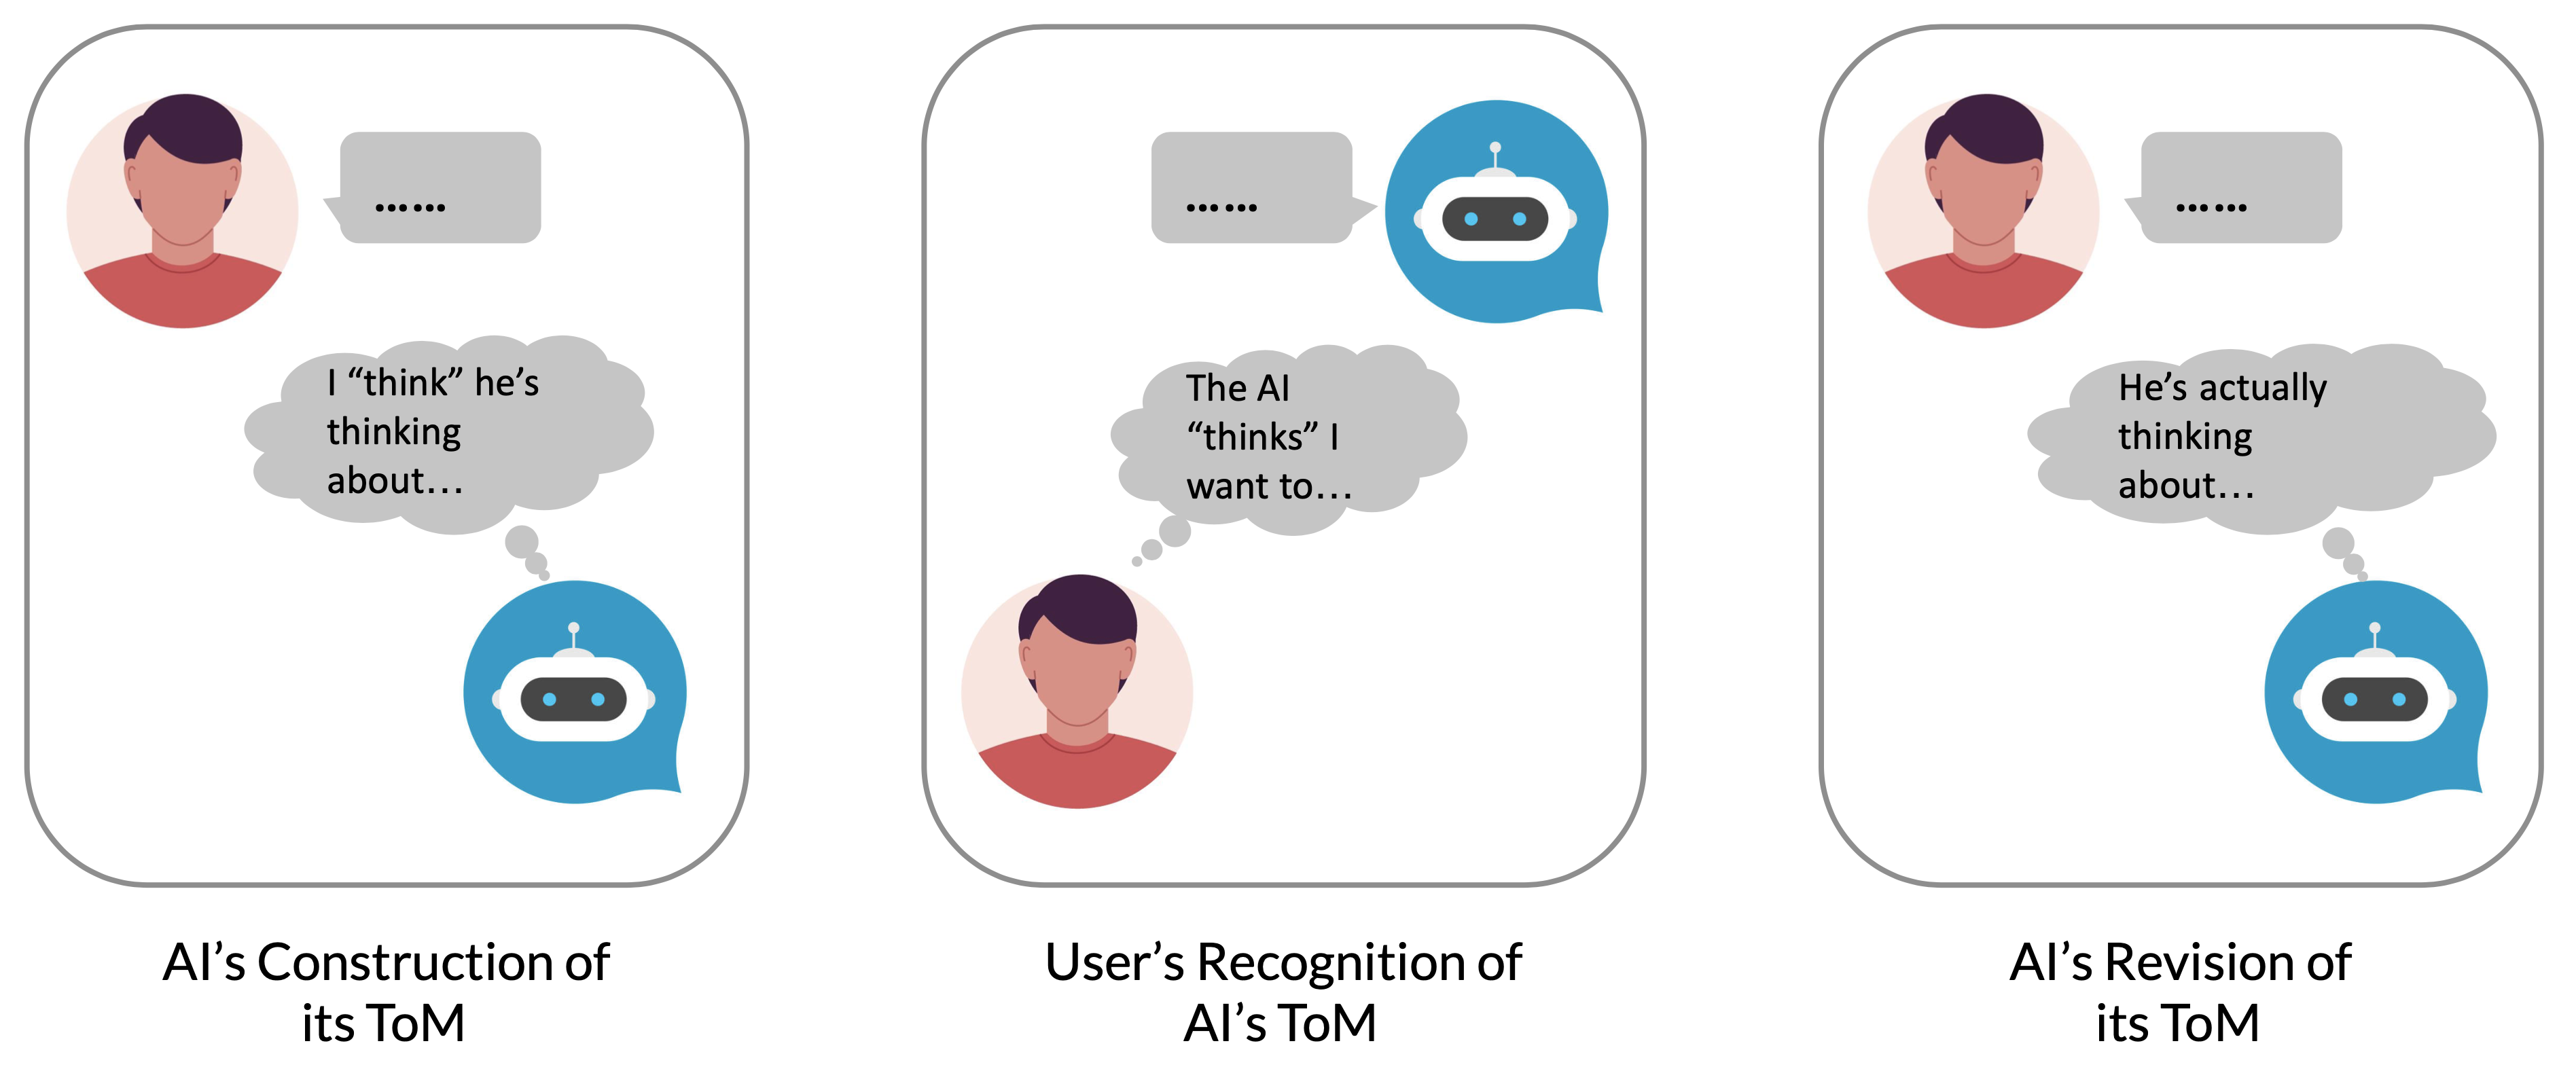 mutual theory of mind framework for human-AI interaction